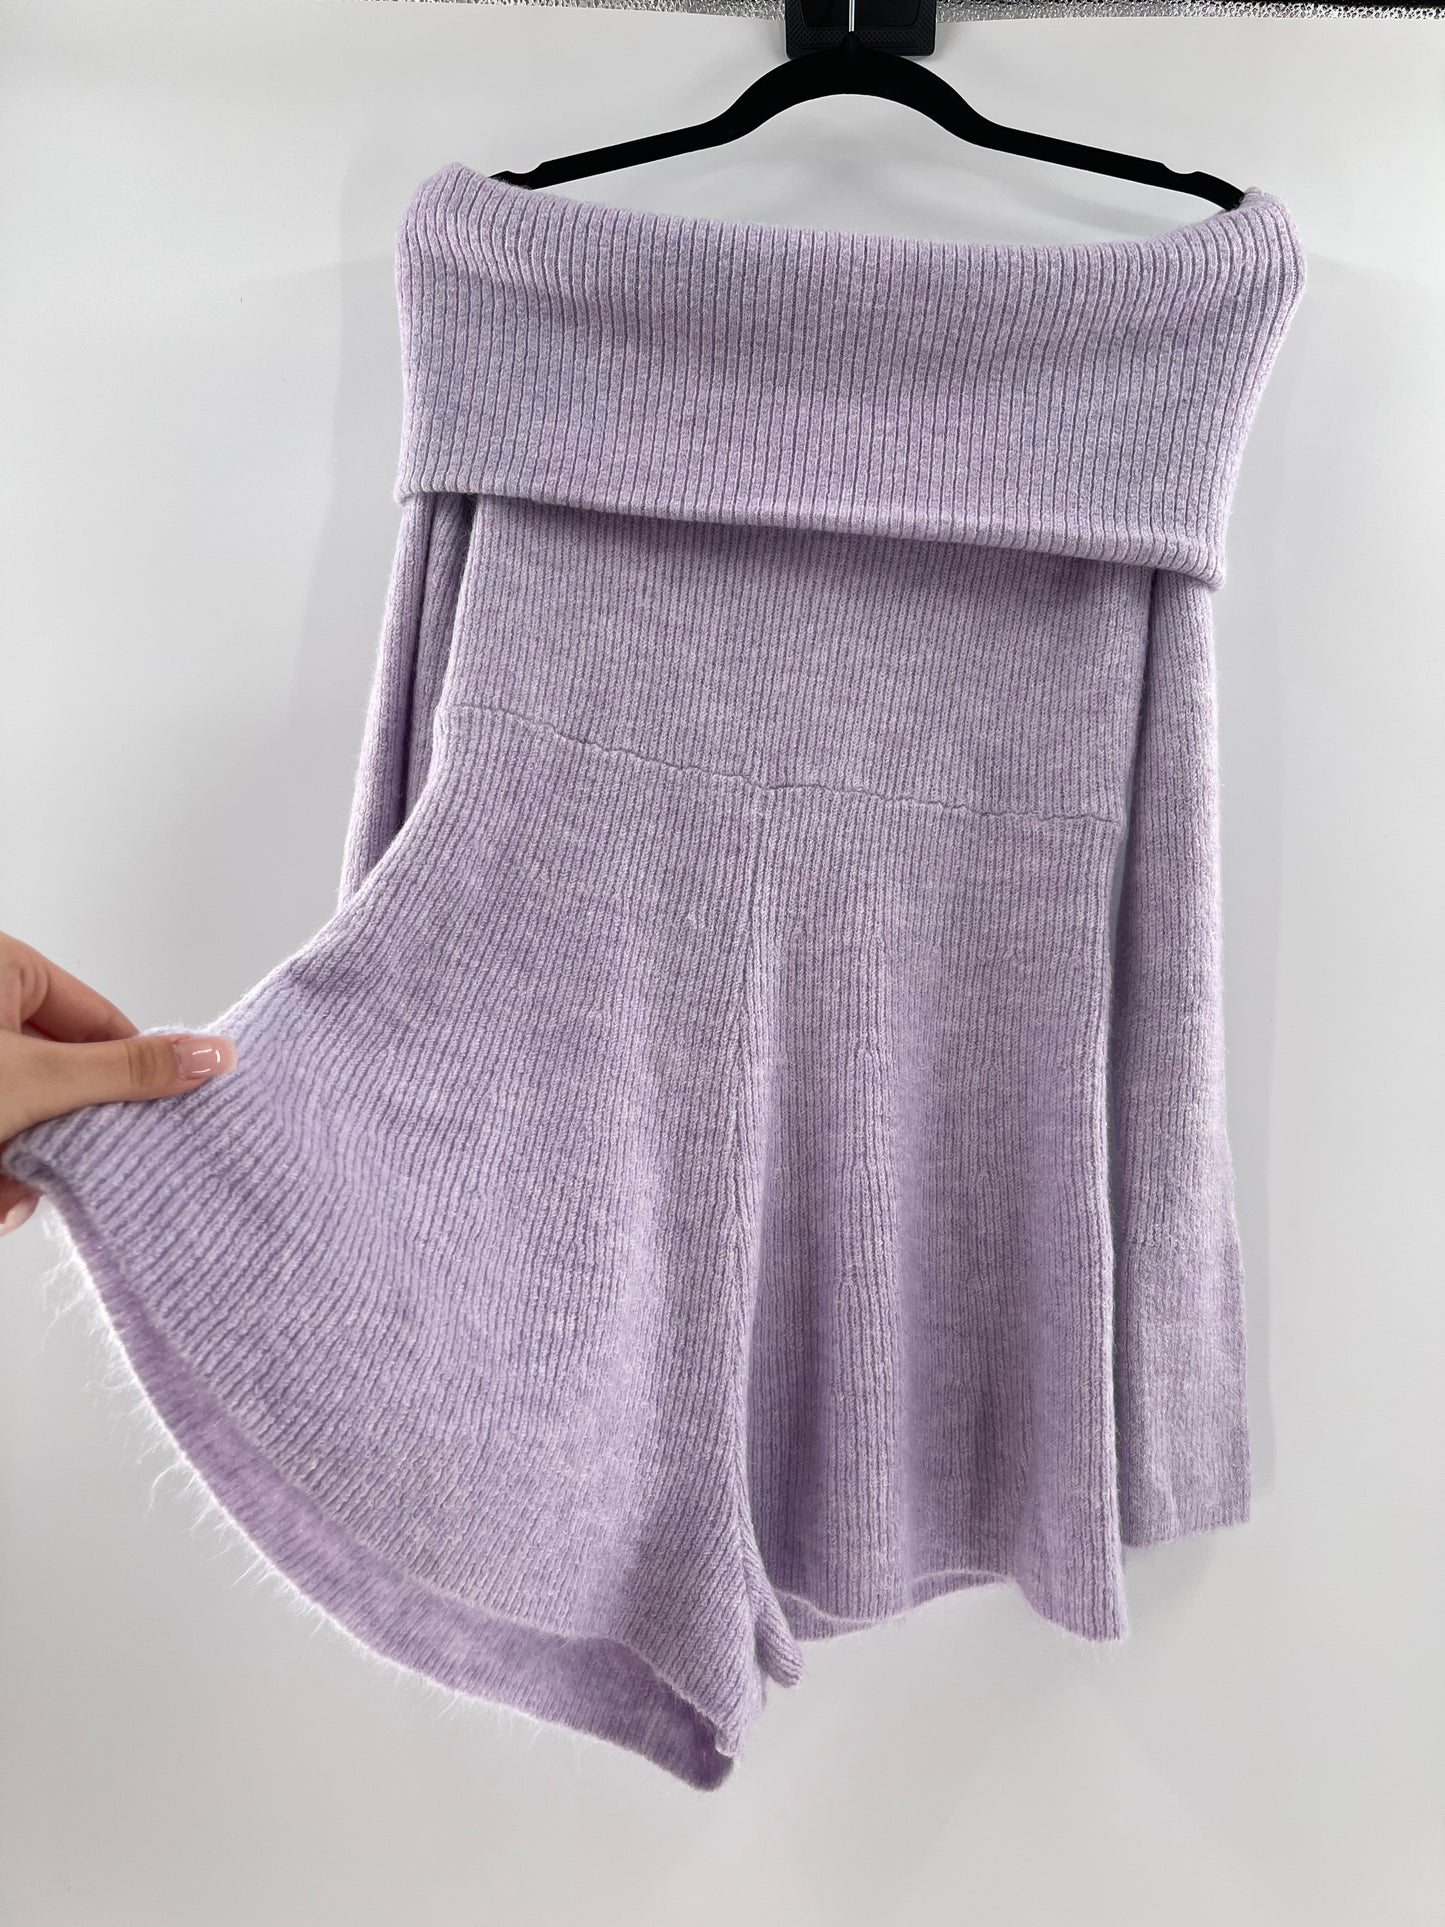 Urban Outfitters Lavendar Knit Playsuit (Large)